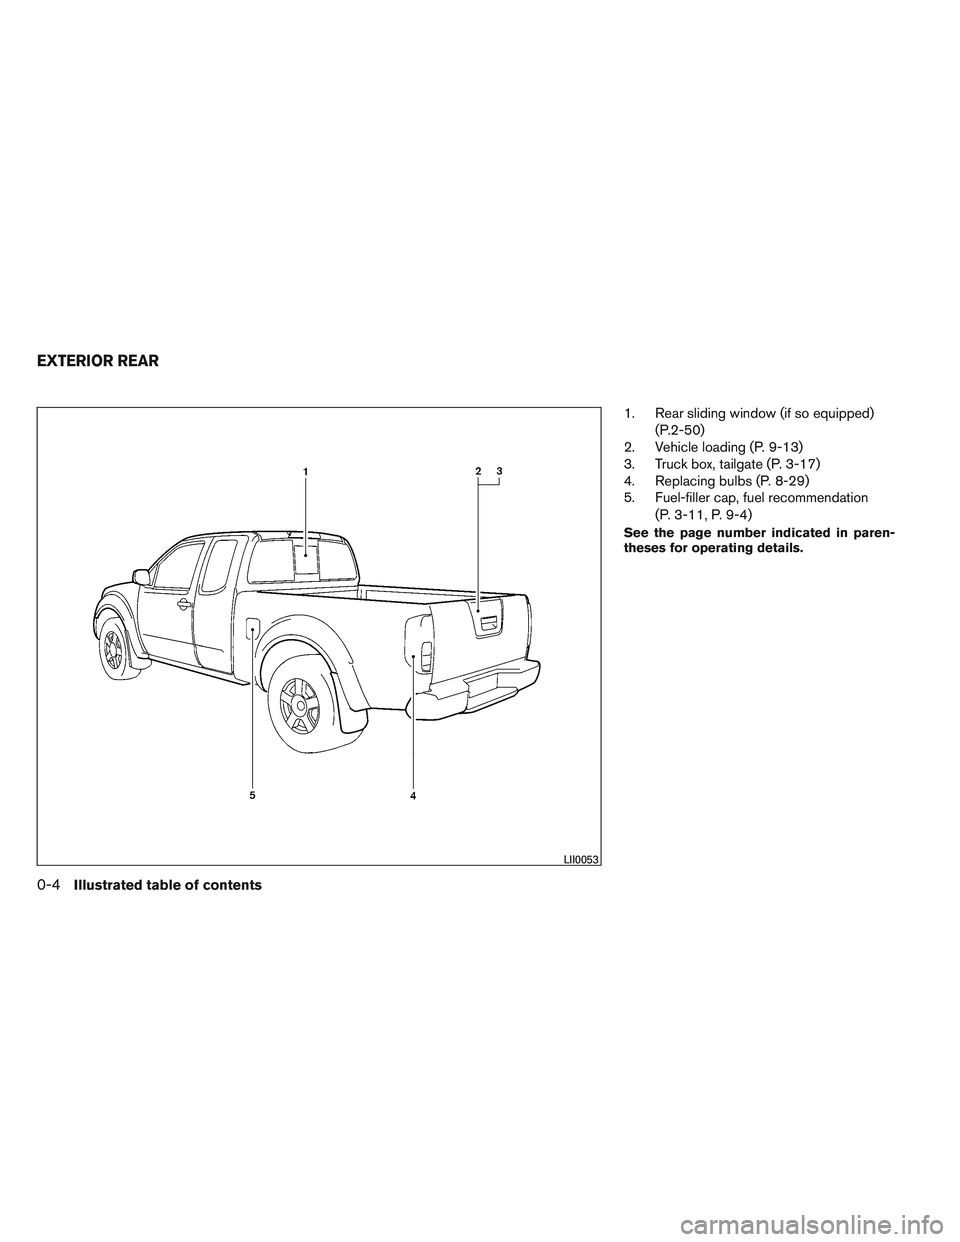 NISSAN FRONTIER 2012  Owner´s Manual 1. Rear sliding window (if so equipped)(P.2-50)
2. Vehicle loading (P. 9-13)
3. Truck box, tailgate (P. 3-17)
4. Replacing bulbs (P. 8-29)
5. Fuel-filler cap, fuel recommendation
(P. 3-11, P. 9-4)
See